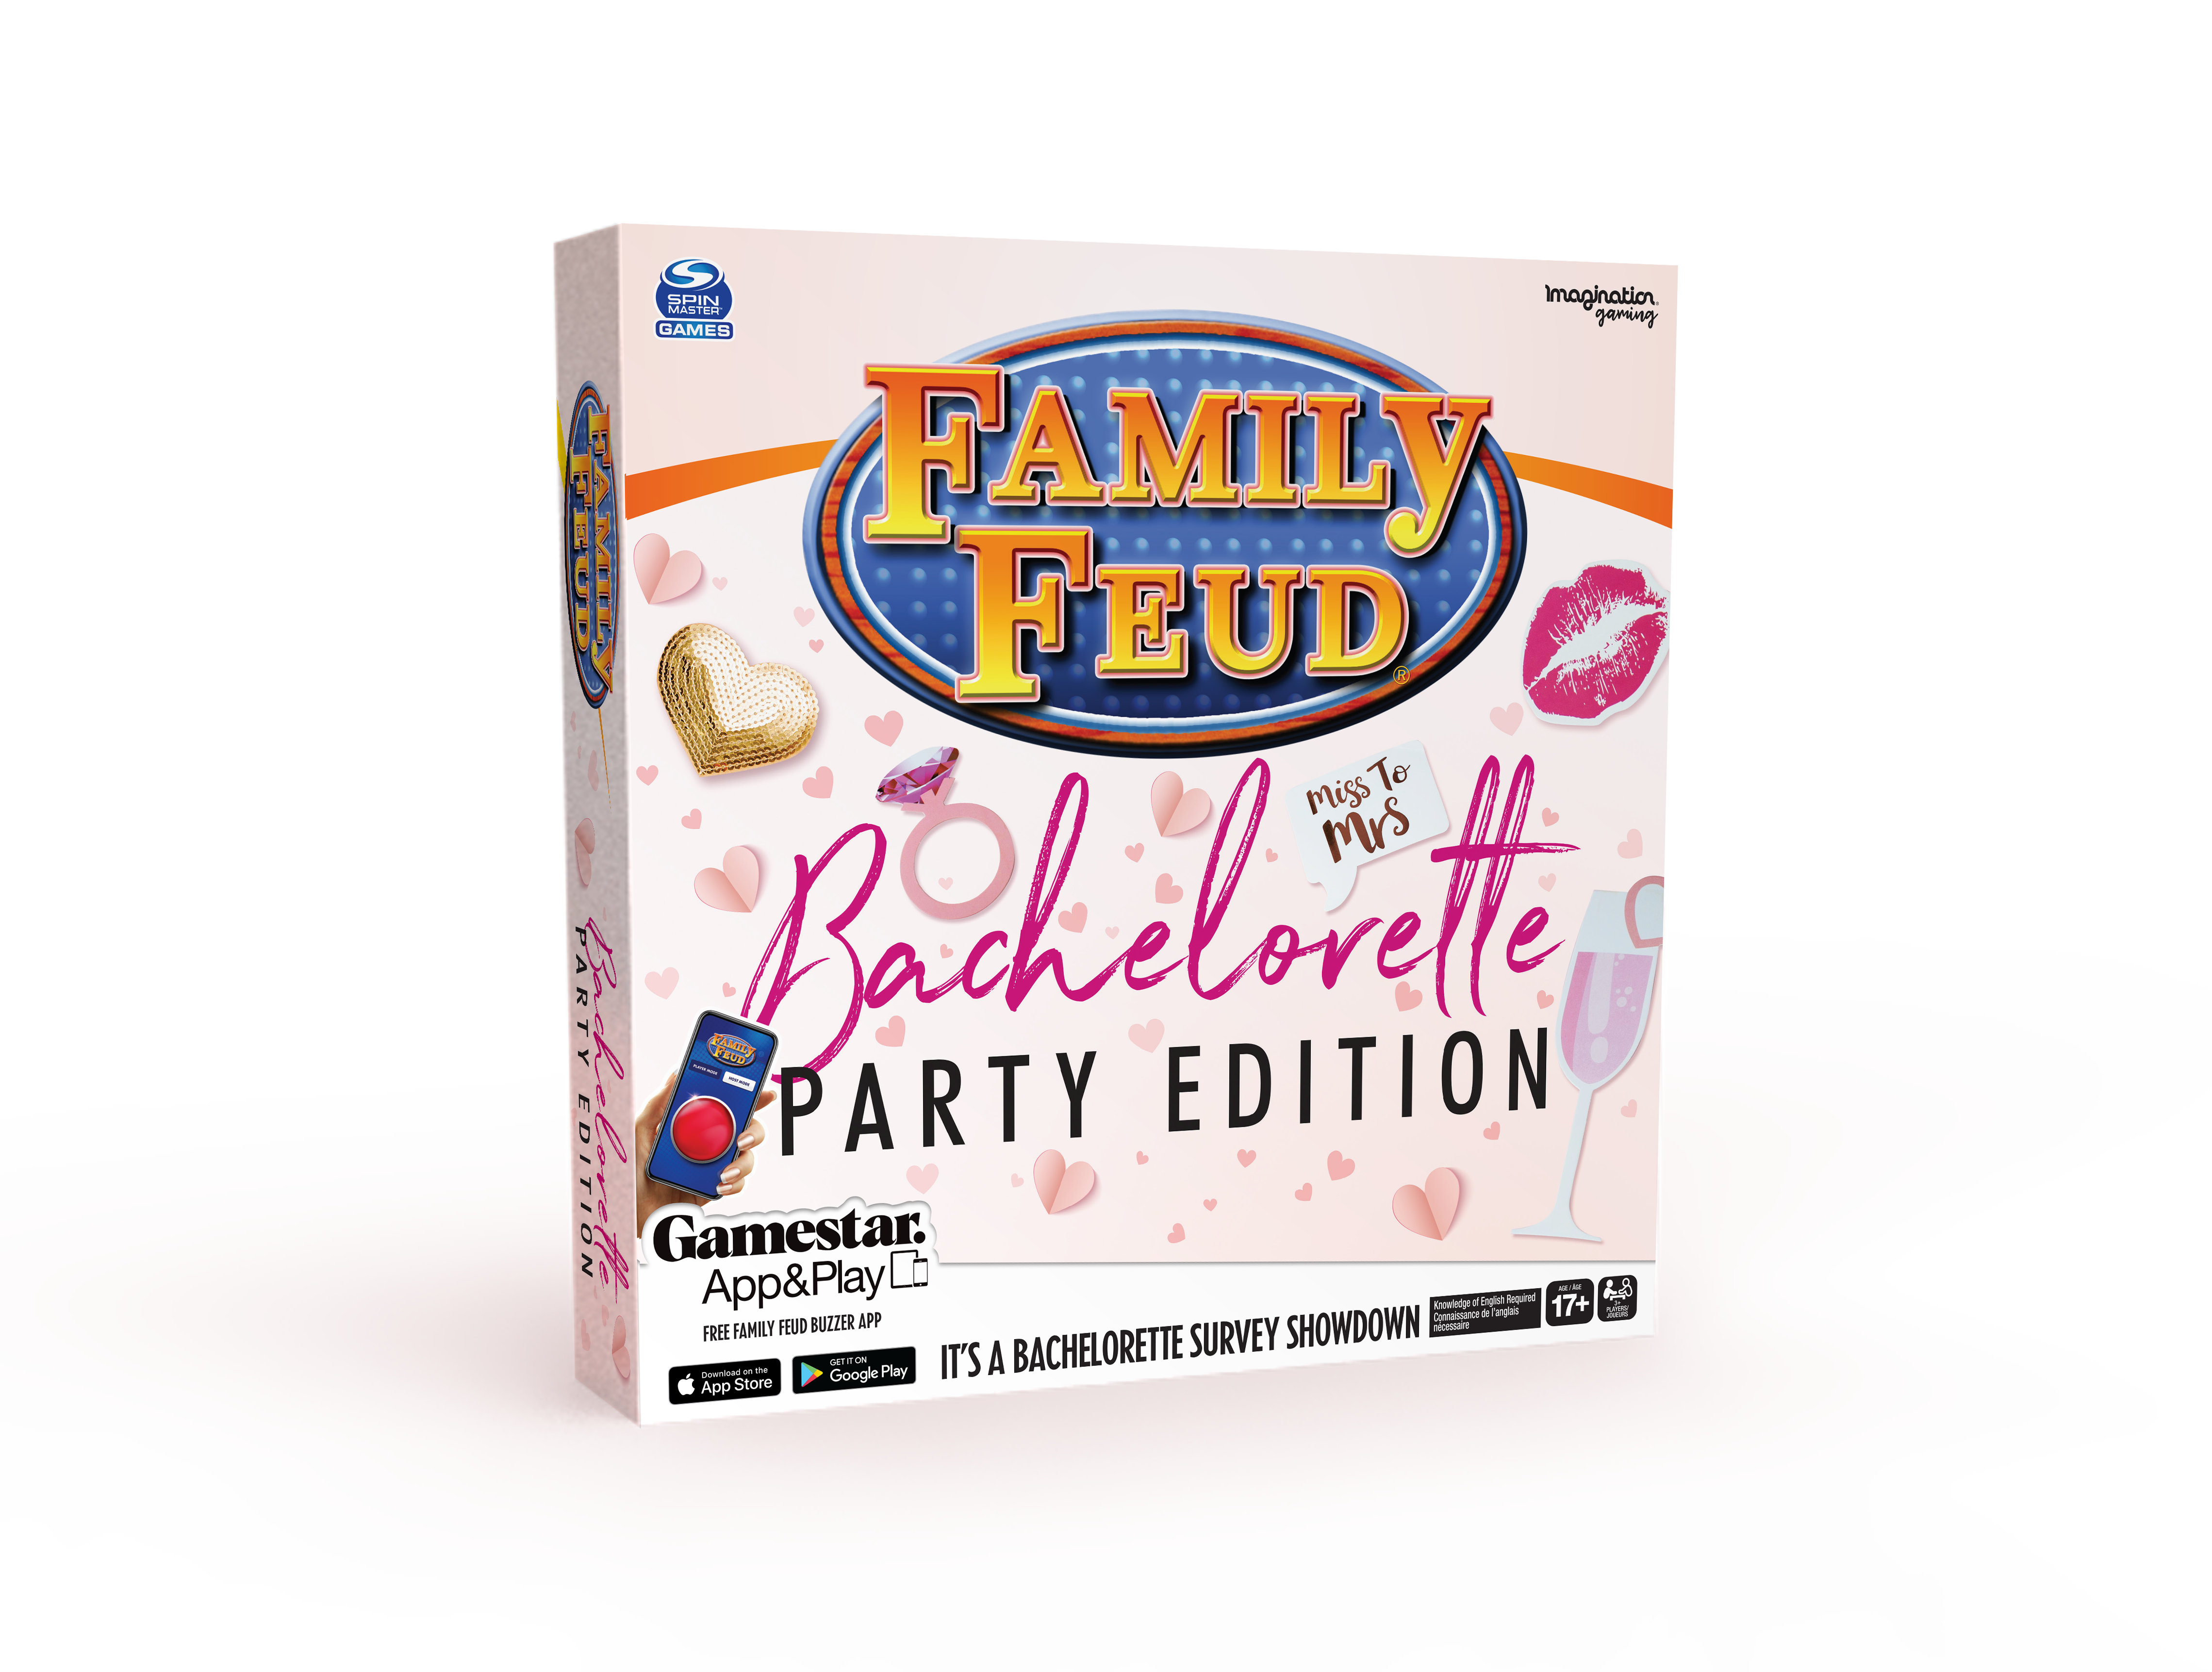  FAMILY FEUD Baby Shower Edition Card Game, Fun